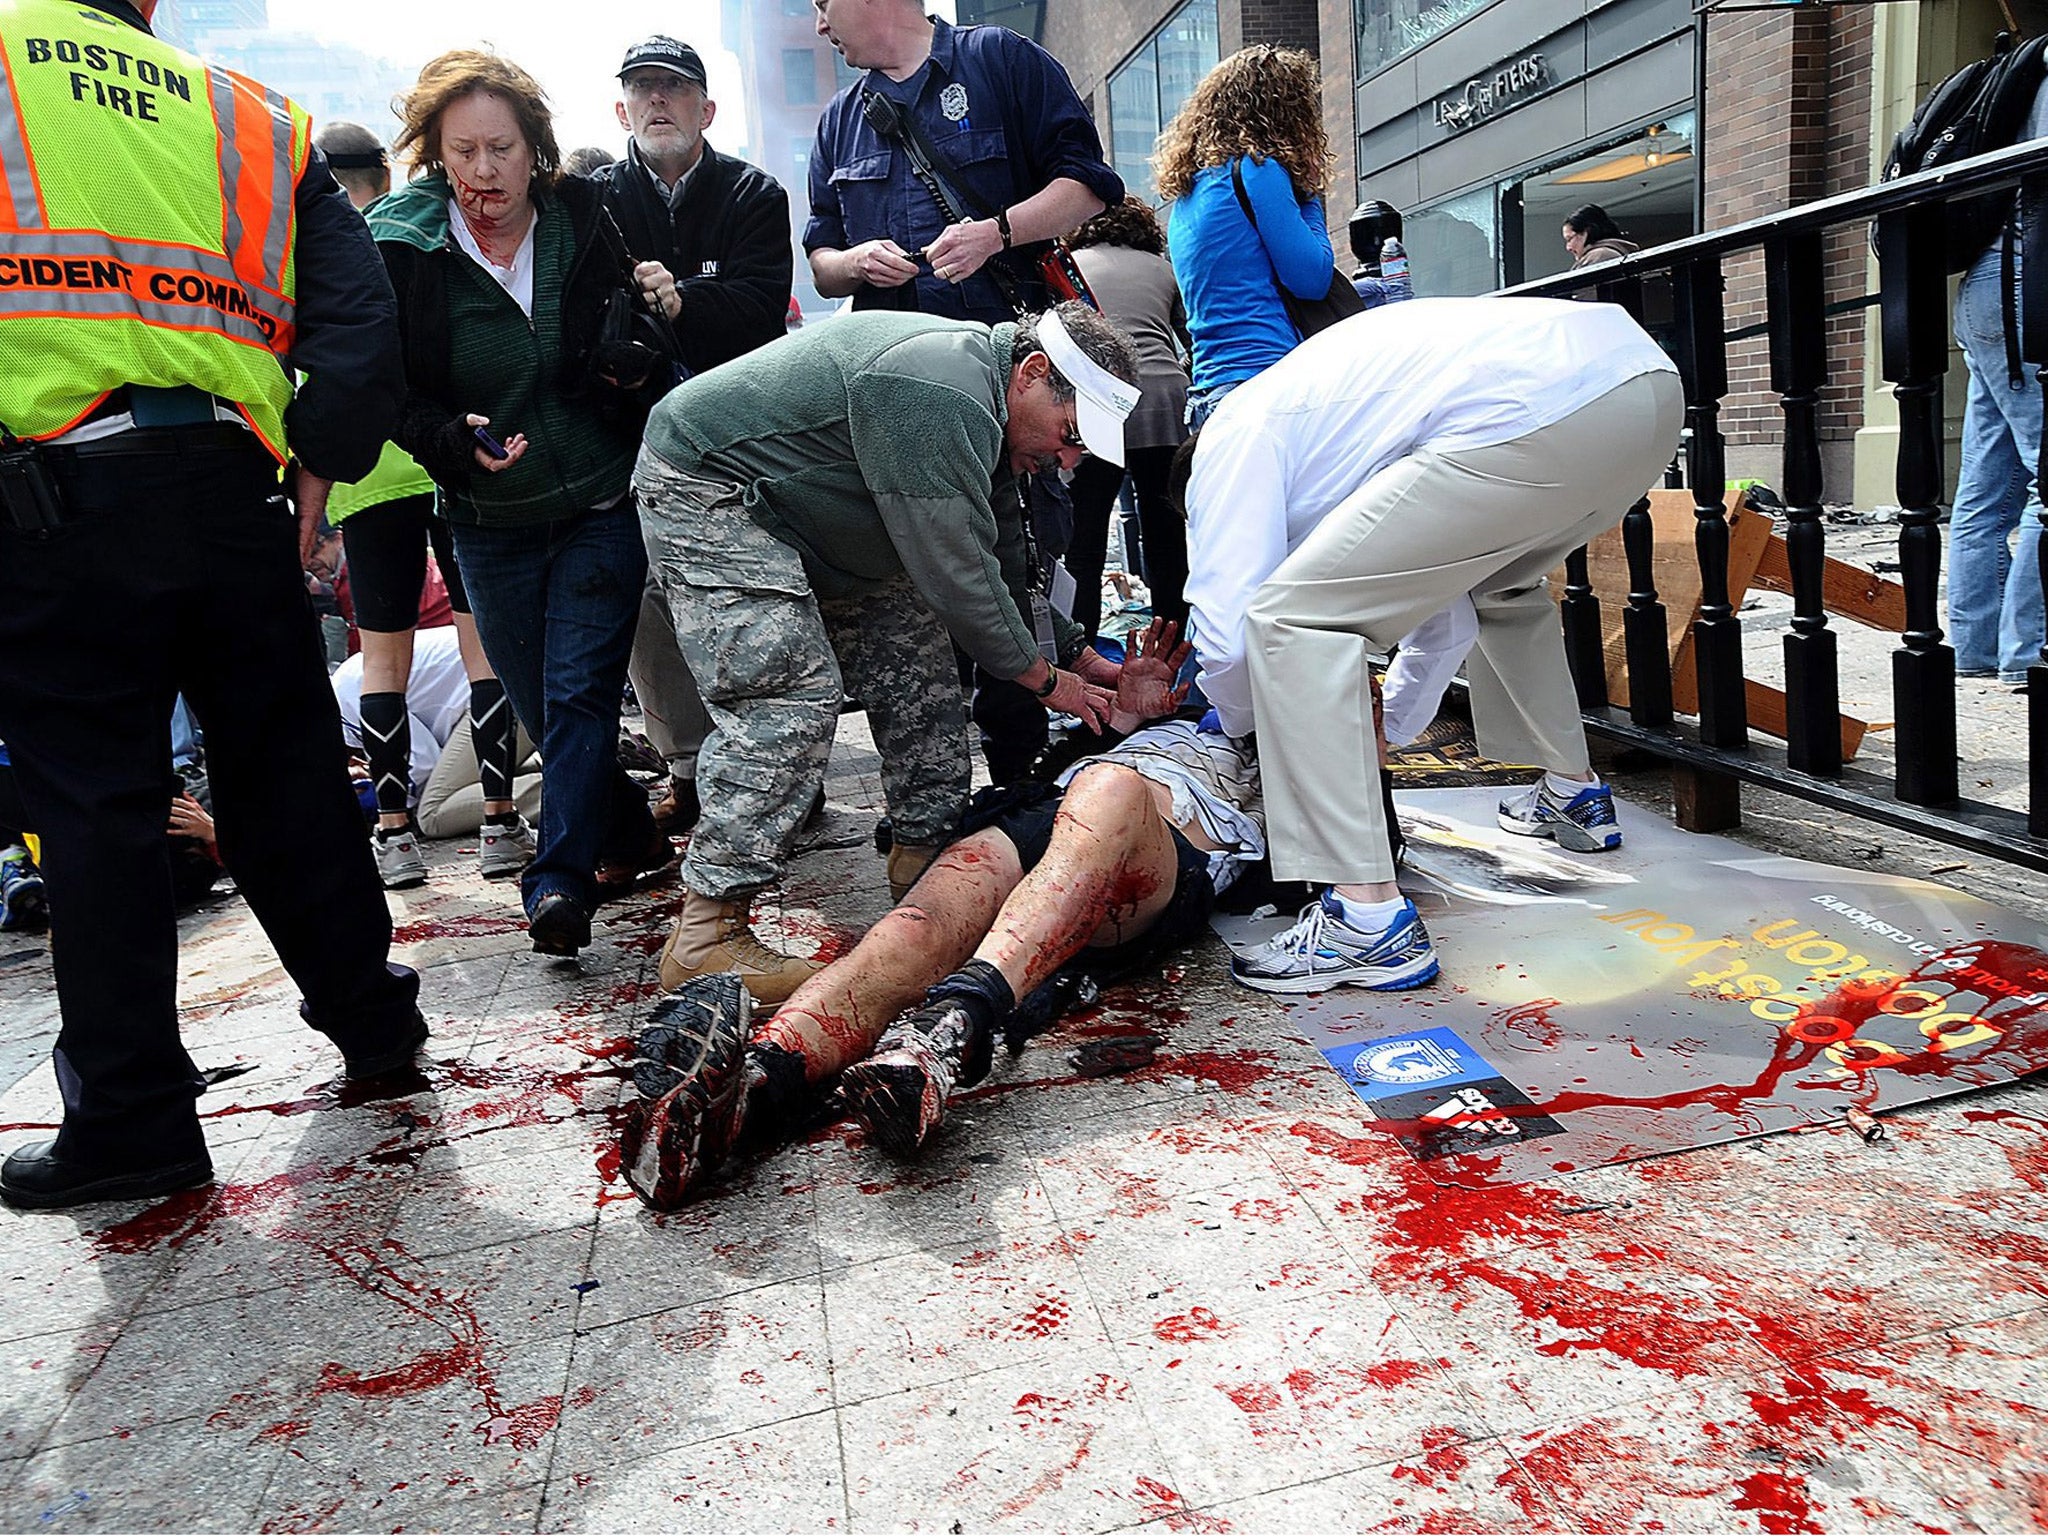 Bystanders tend to people injured by the explosions at the finishing line of the Boston Marathon on Monday